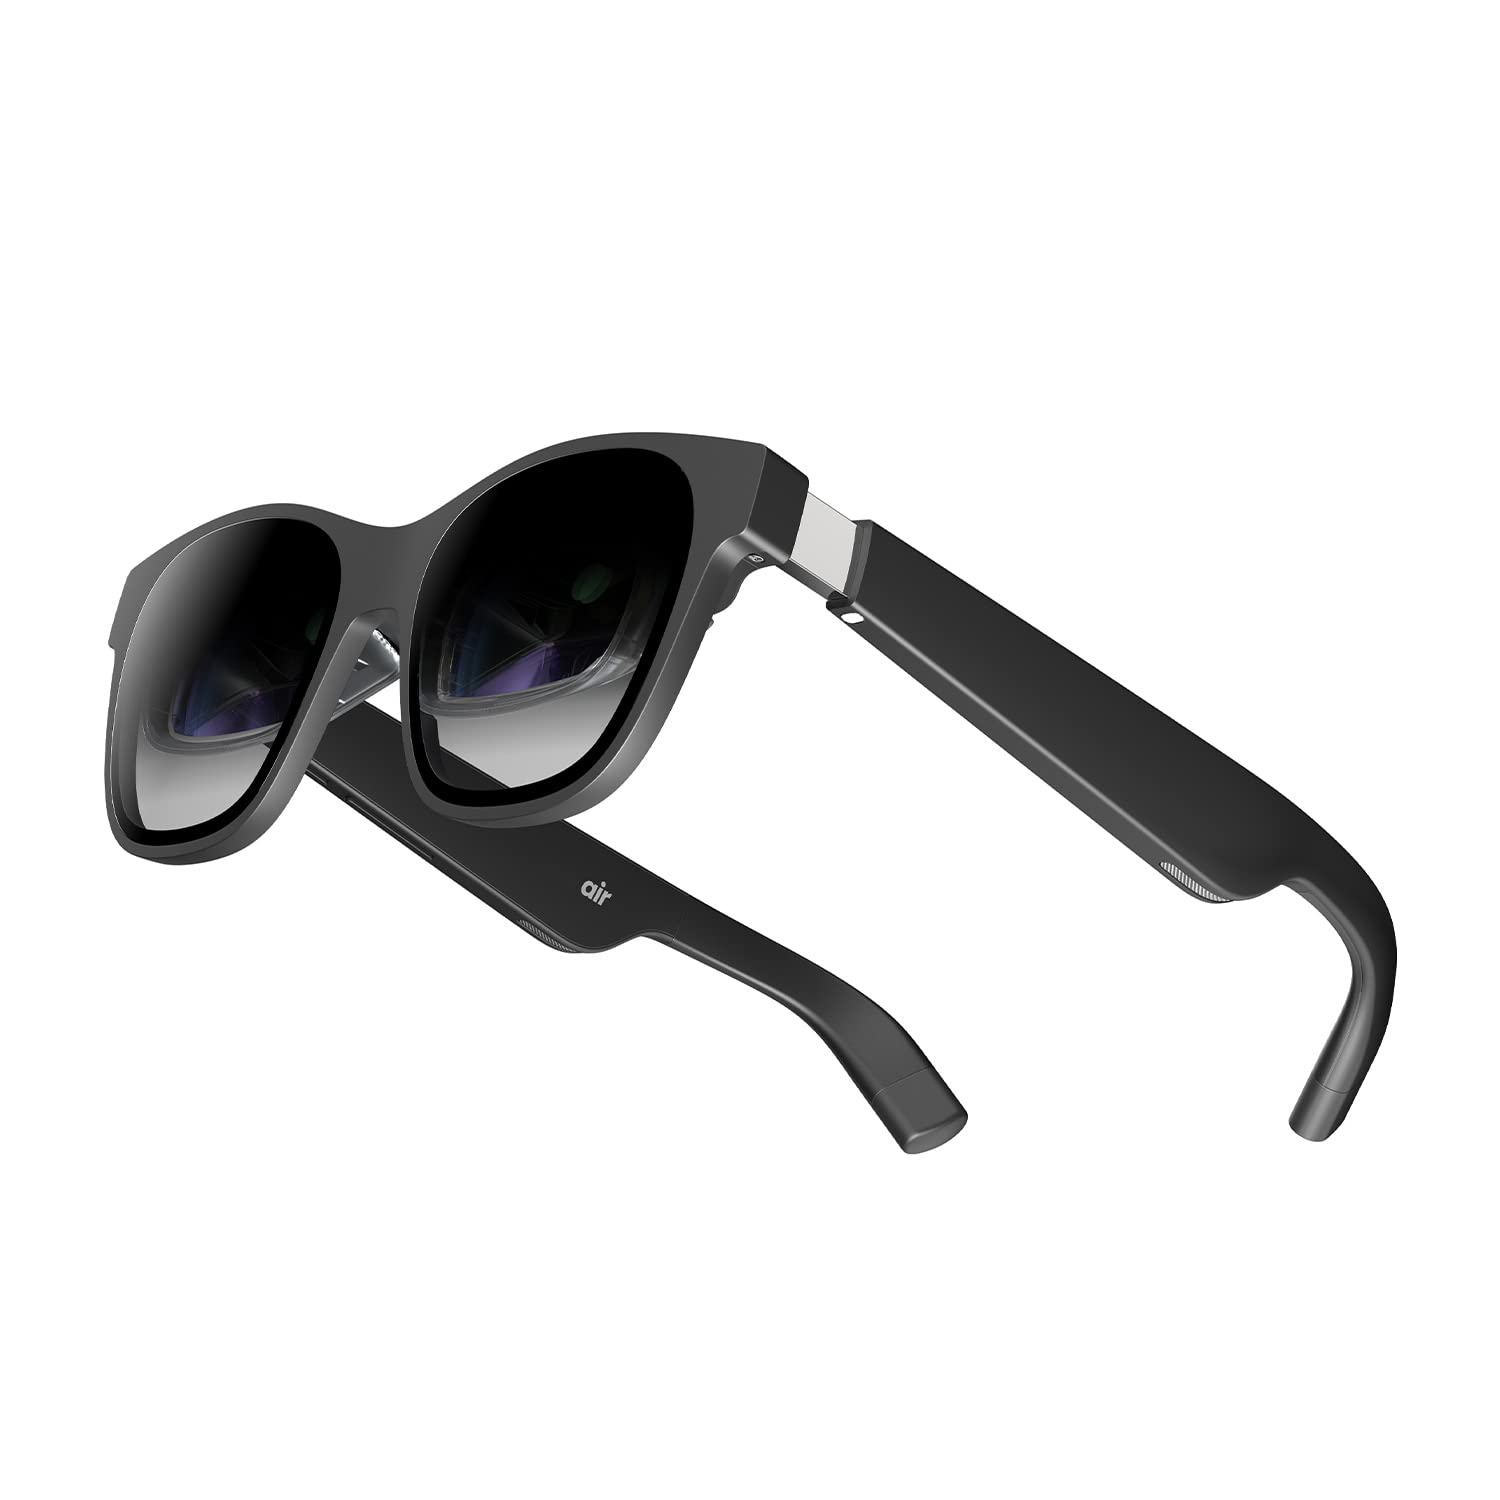 XREAL Air AR Glasses, Formerly Nreal, Smart Glasses with Massive 201 Micro-OLED Virtual Theater, Augmented Reality Glasses, Watch, Stream, and Game on PC/Android/iOS–Consoles Cloud Gaming Compatible